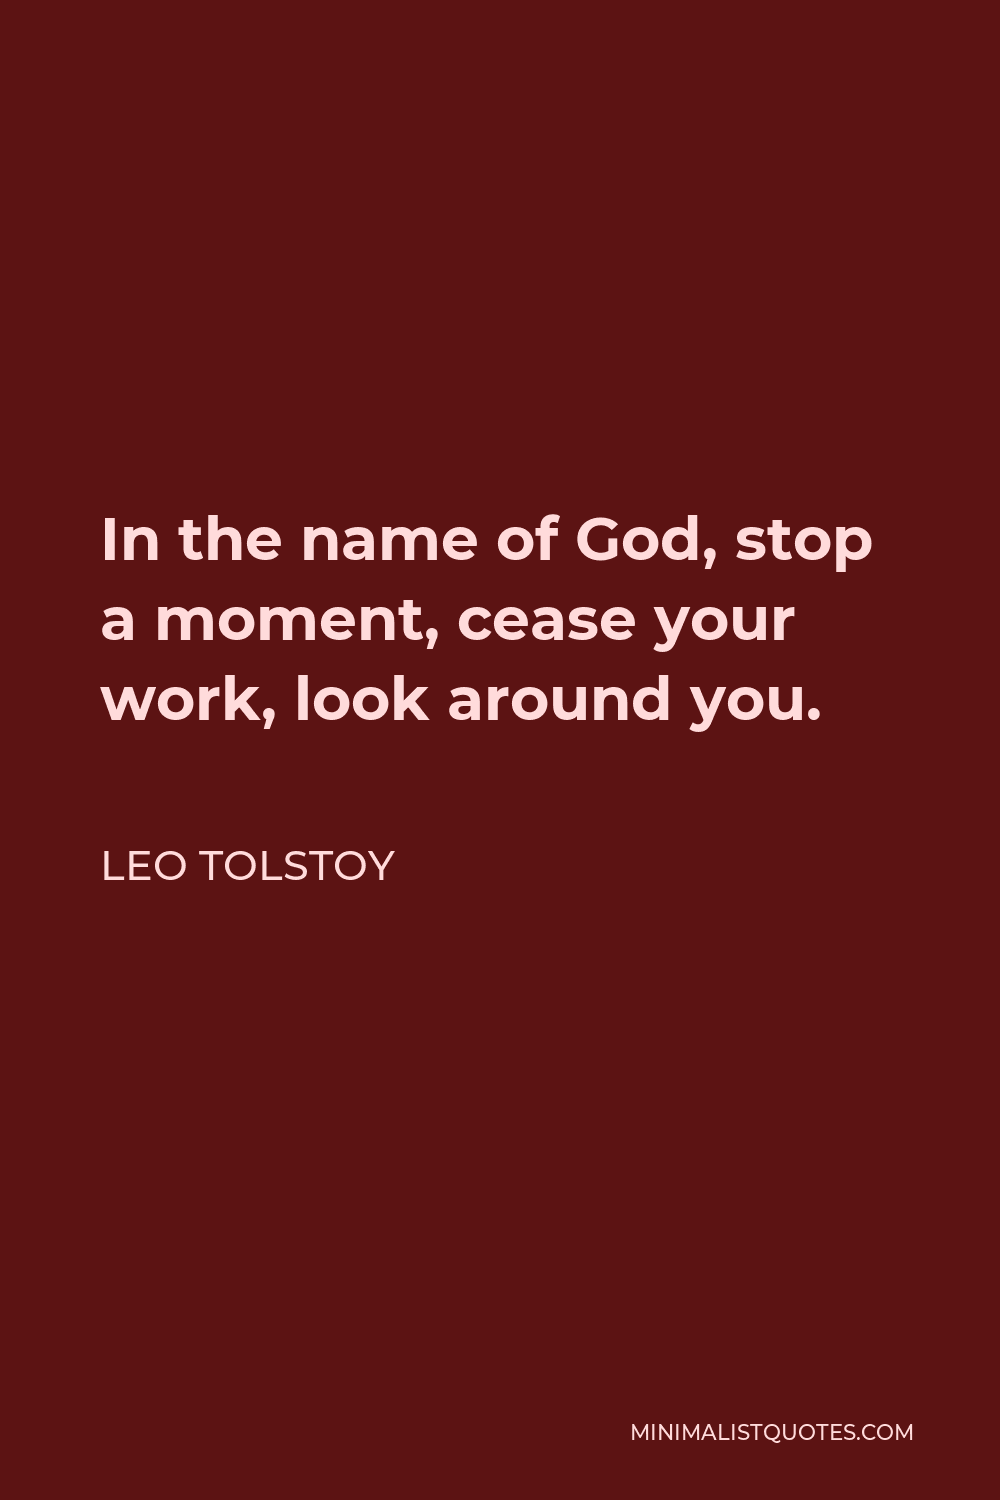 Leo Tolstoy Quote - In the name of God, stop a moment, cease your work, look around you.